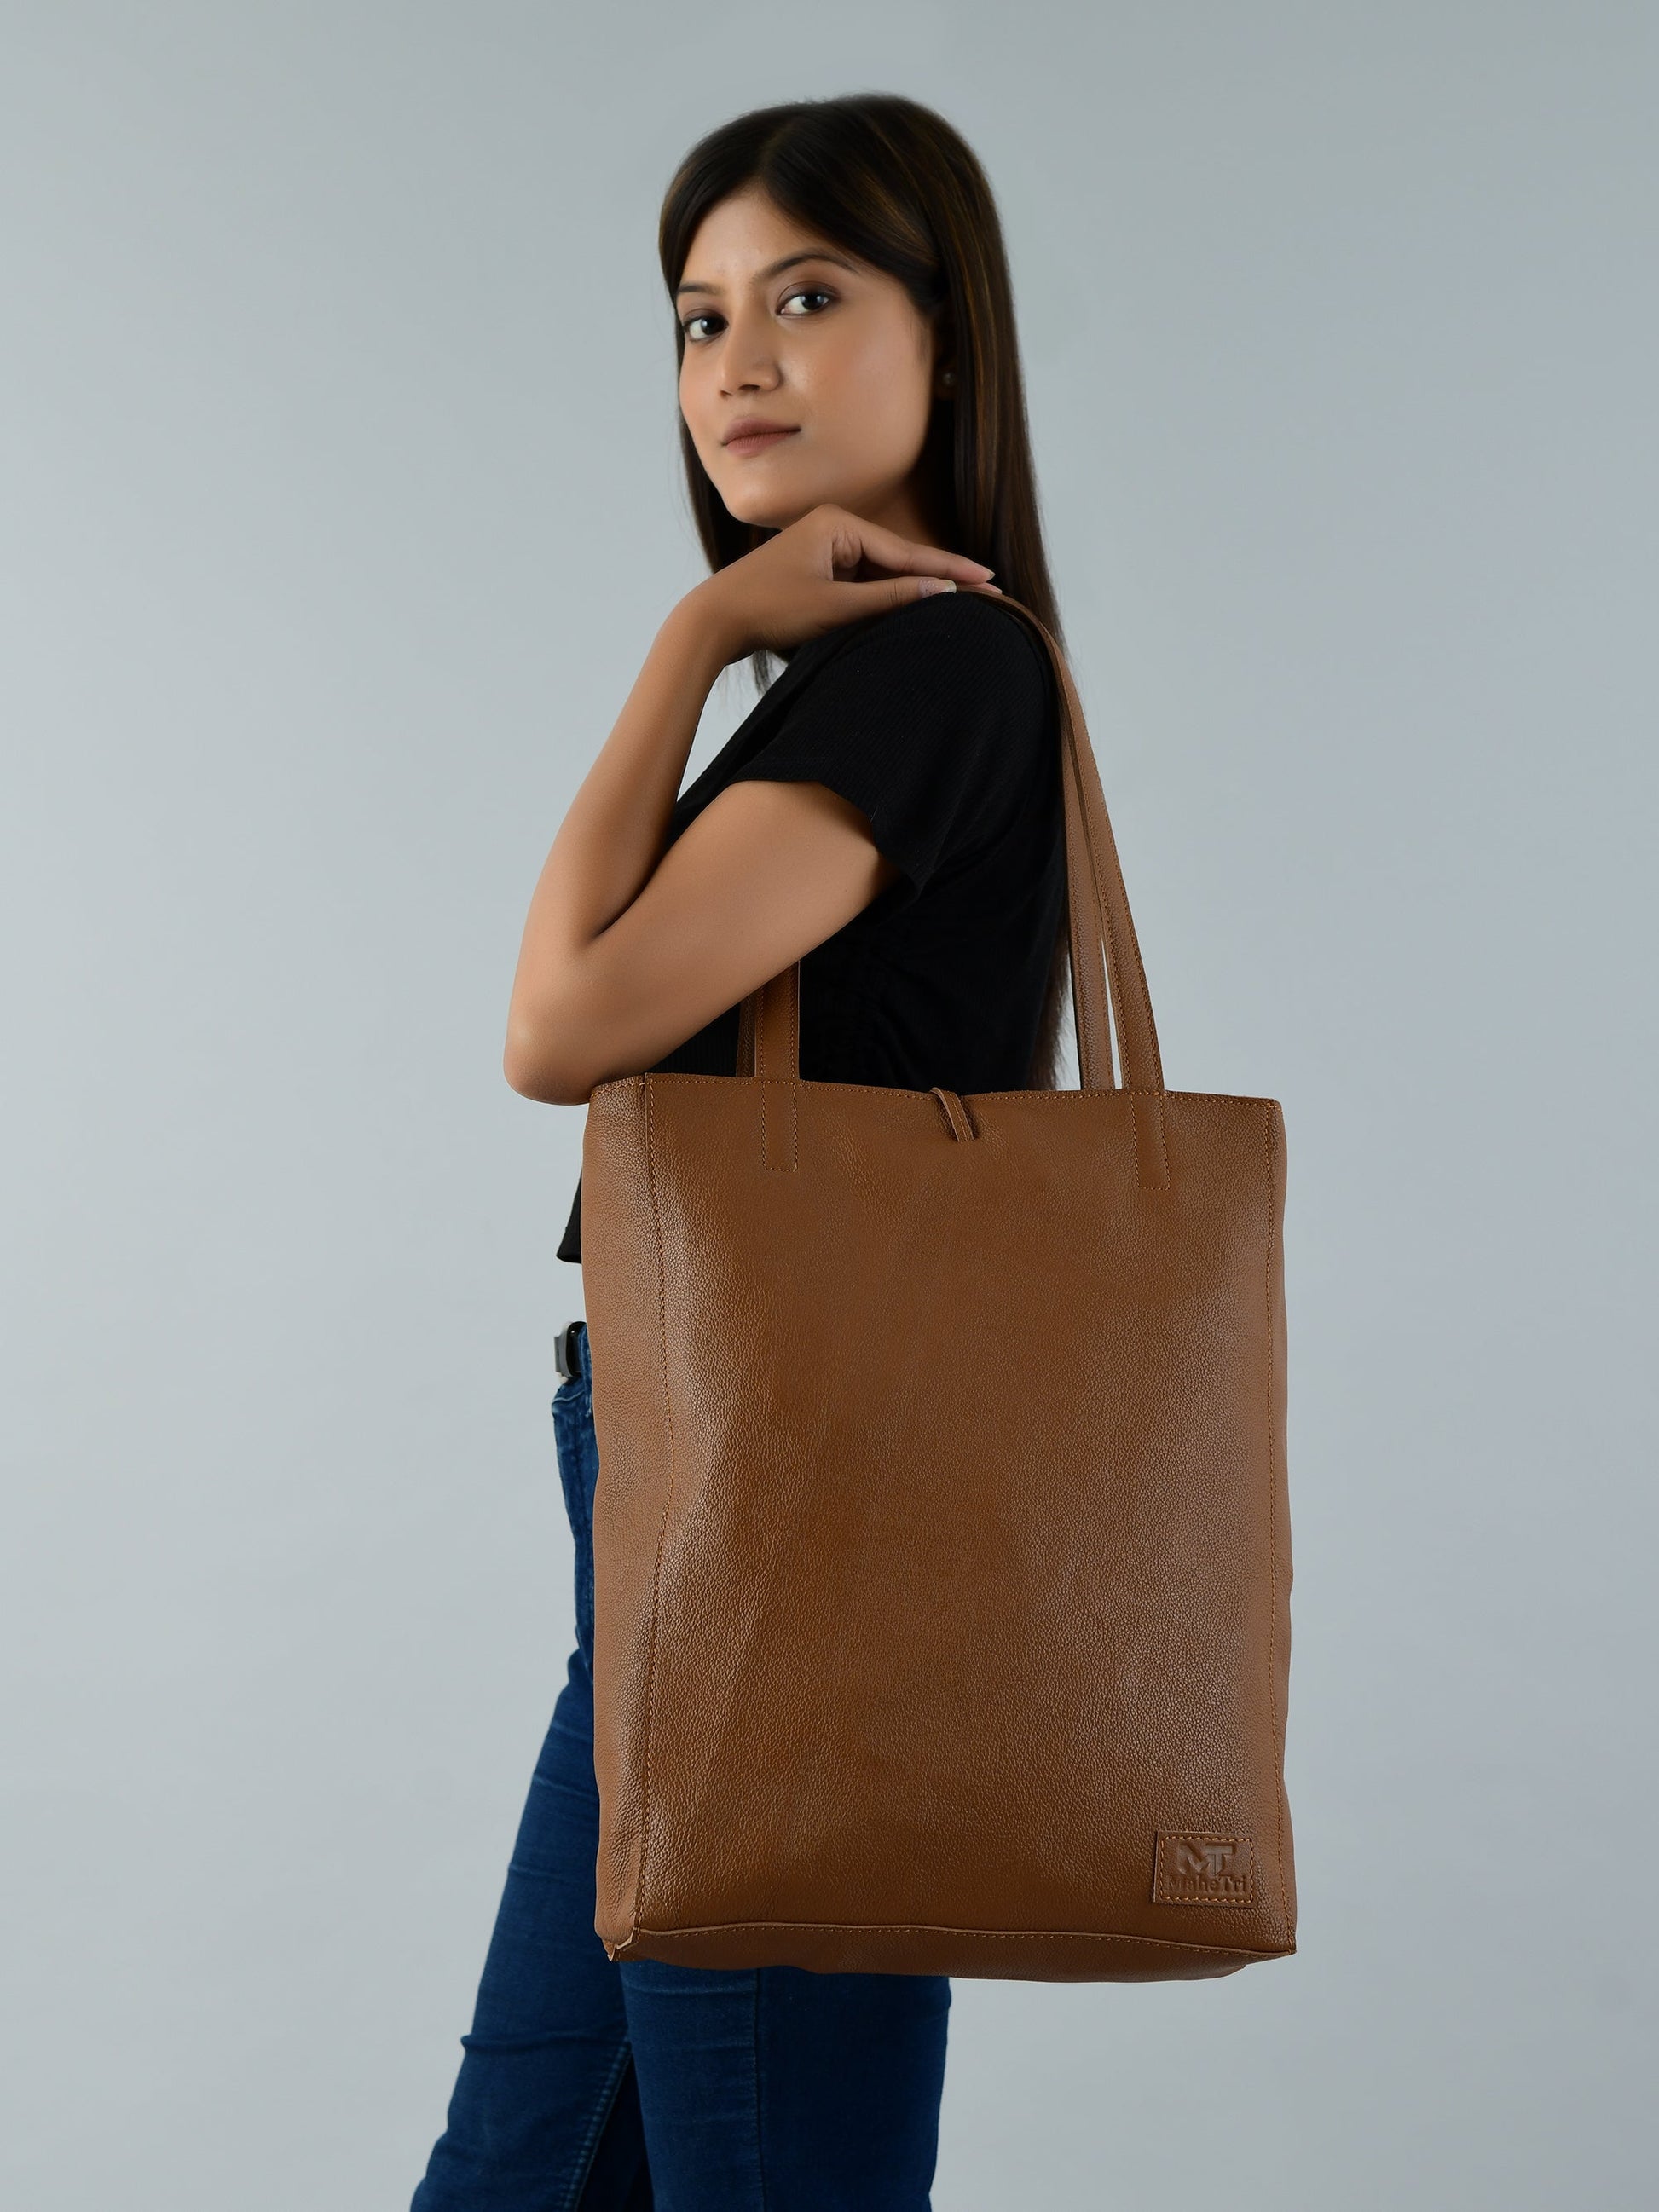 Café Chic Women's Leather Tote Bag - The Tool Store